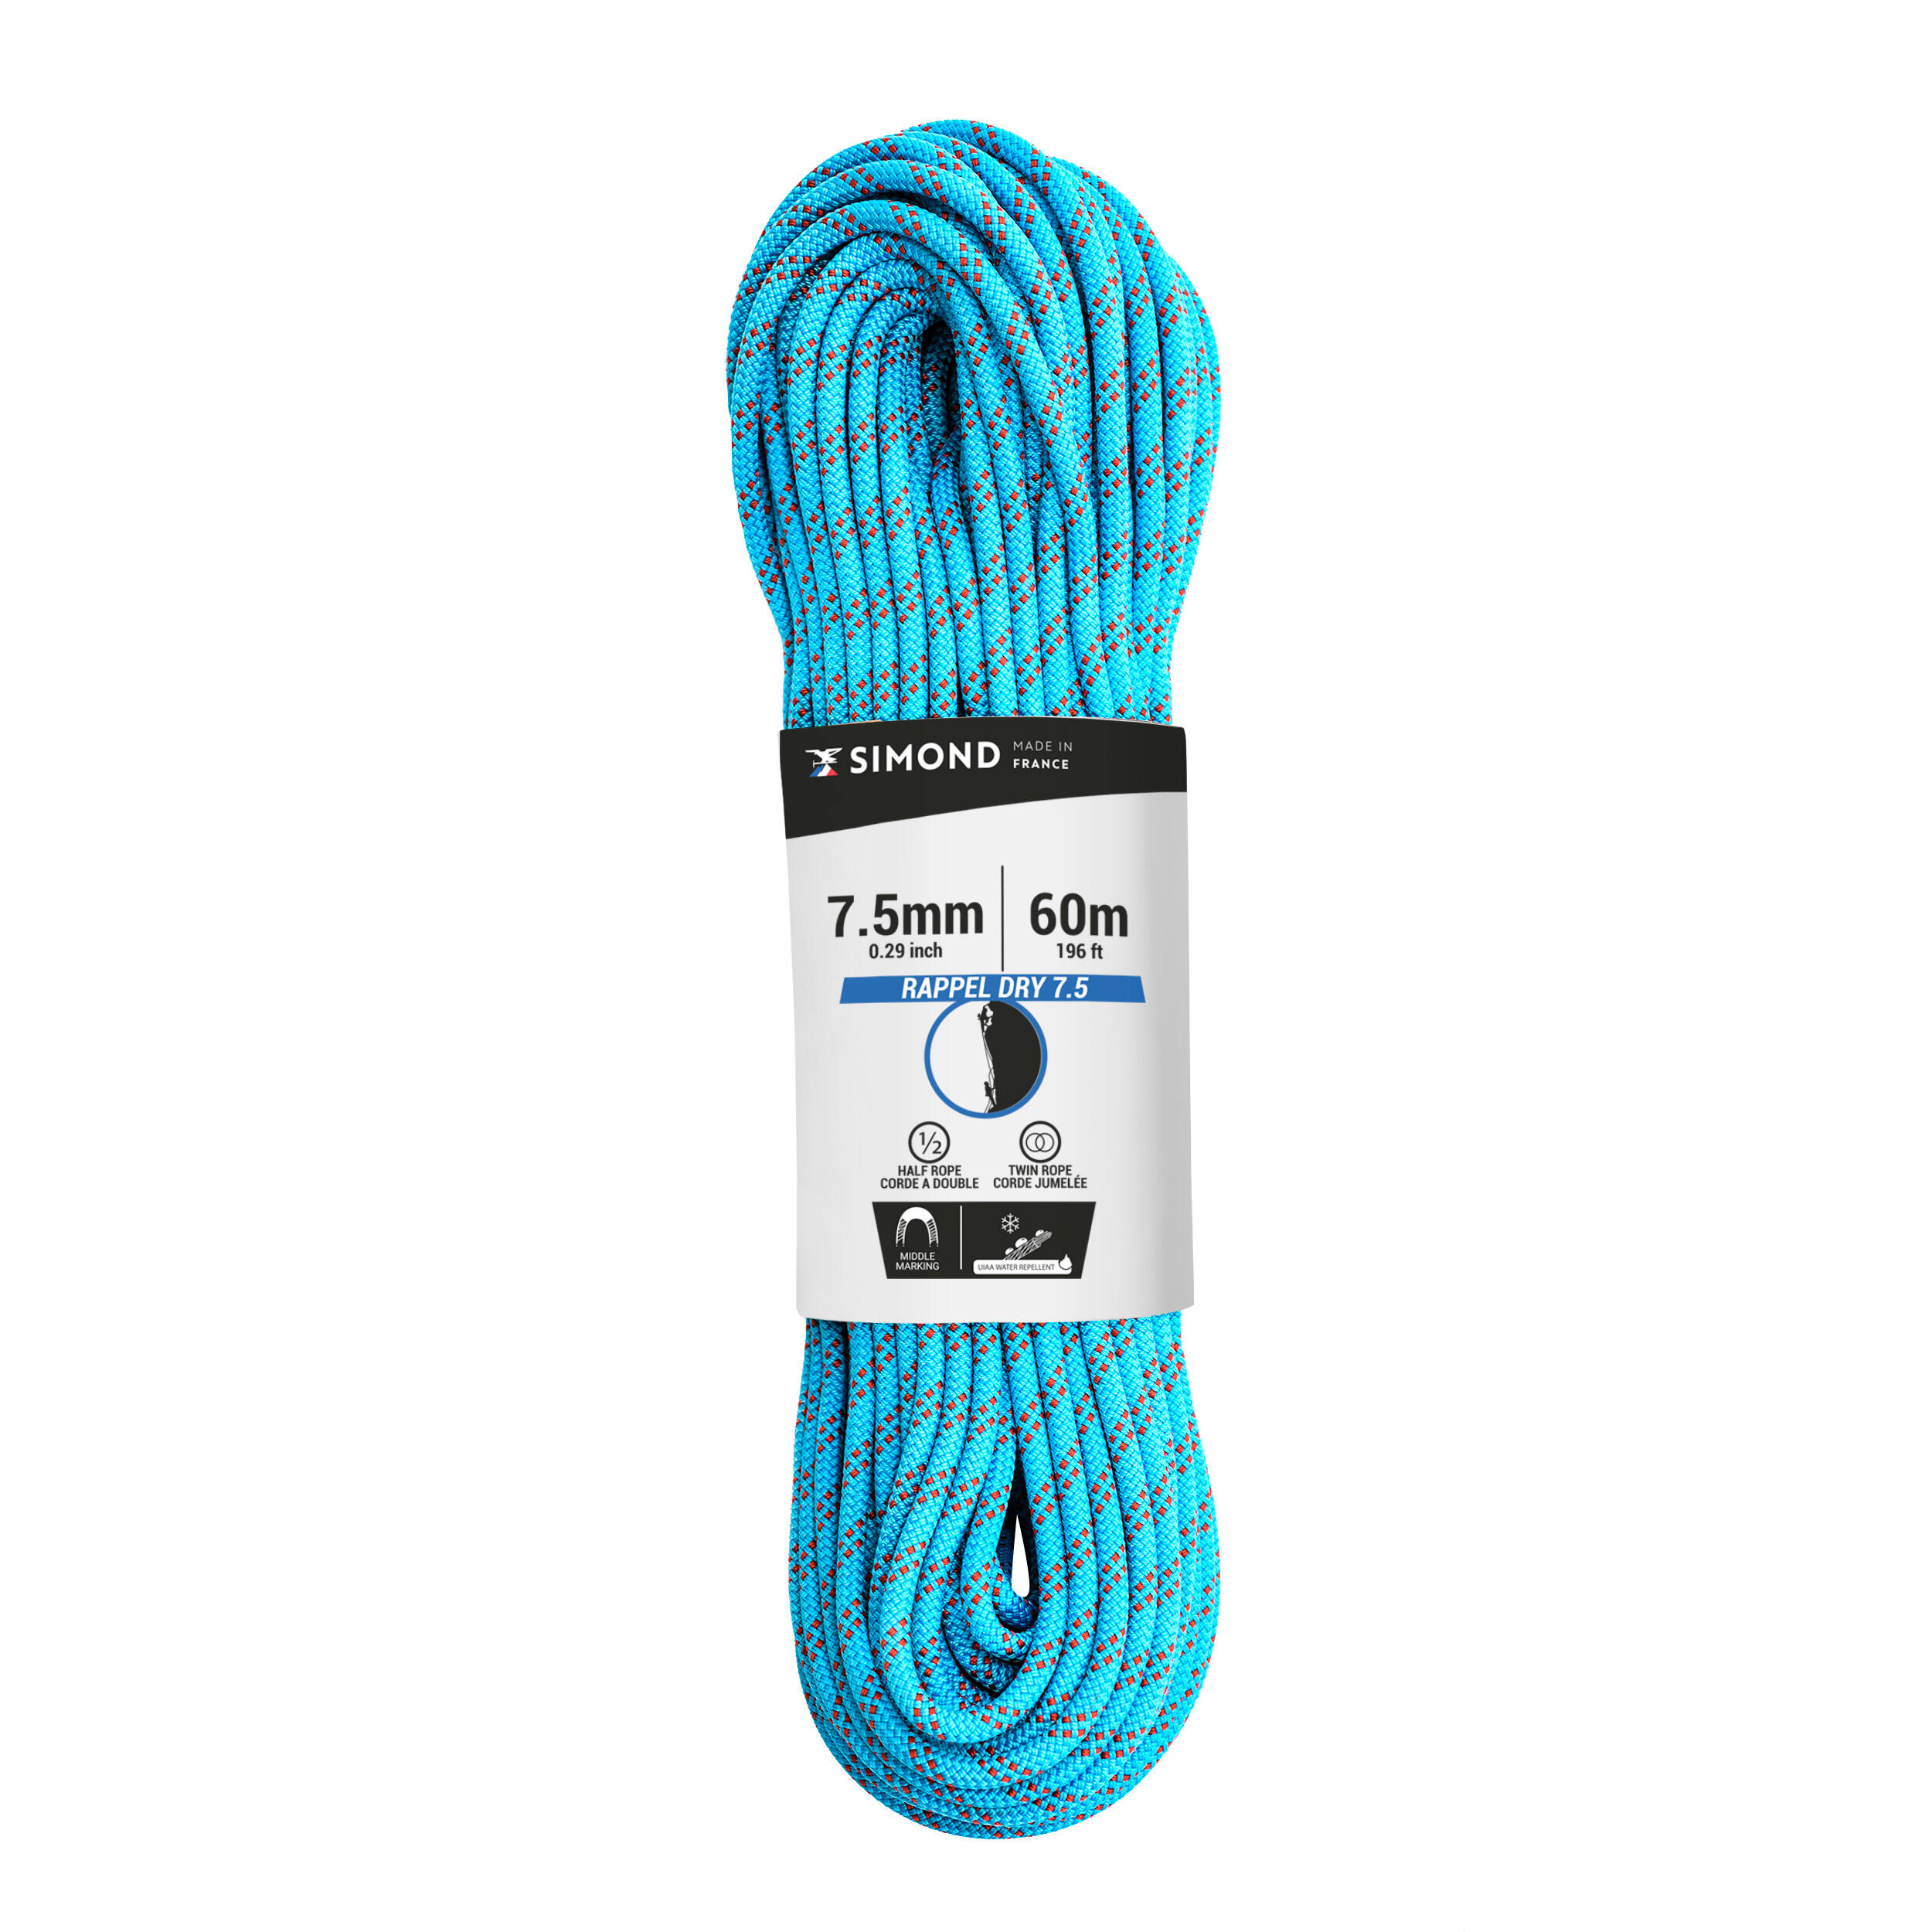 Double dry climbing and mountaineering rope 7.5 mm x 60 m - RAPPEL 7.5 Blue 1/3